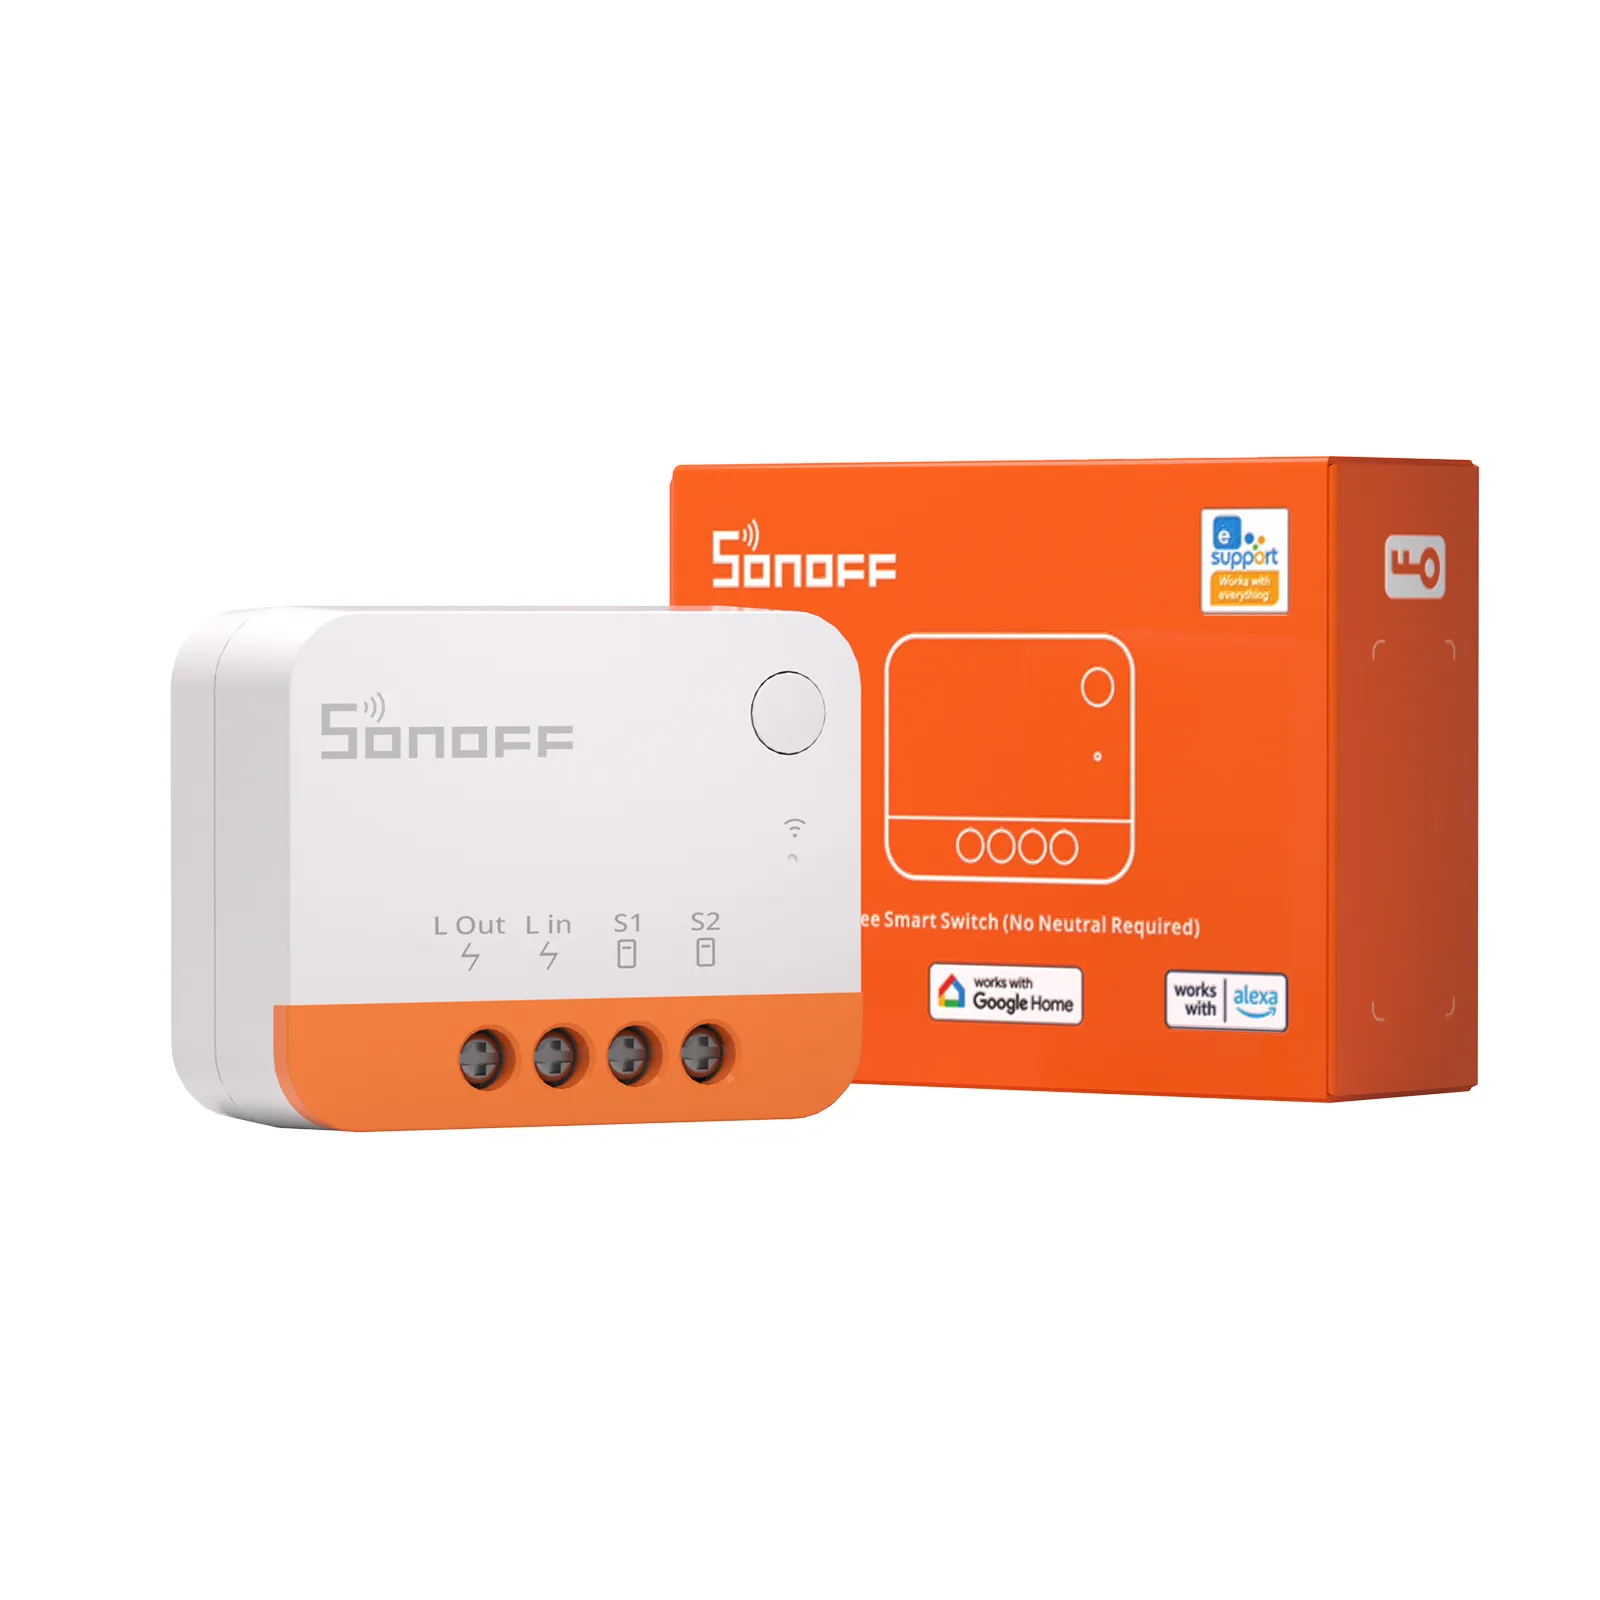 SONOFF ZBMINI Extreme Zigbee Smart Switch ZBMINIL2 (No Neutral Required) 2